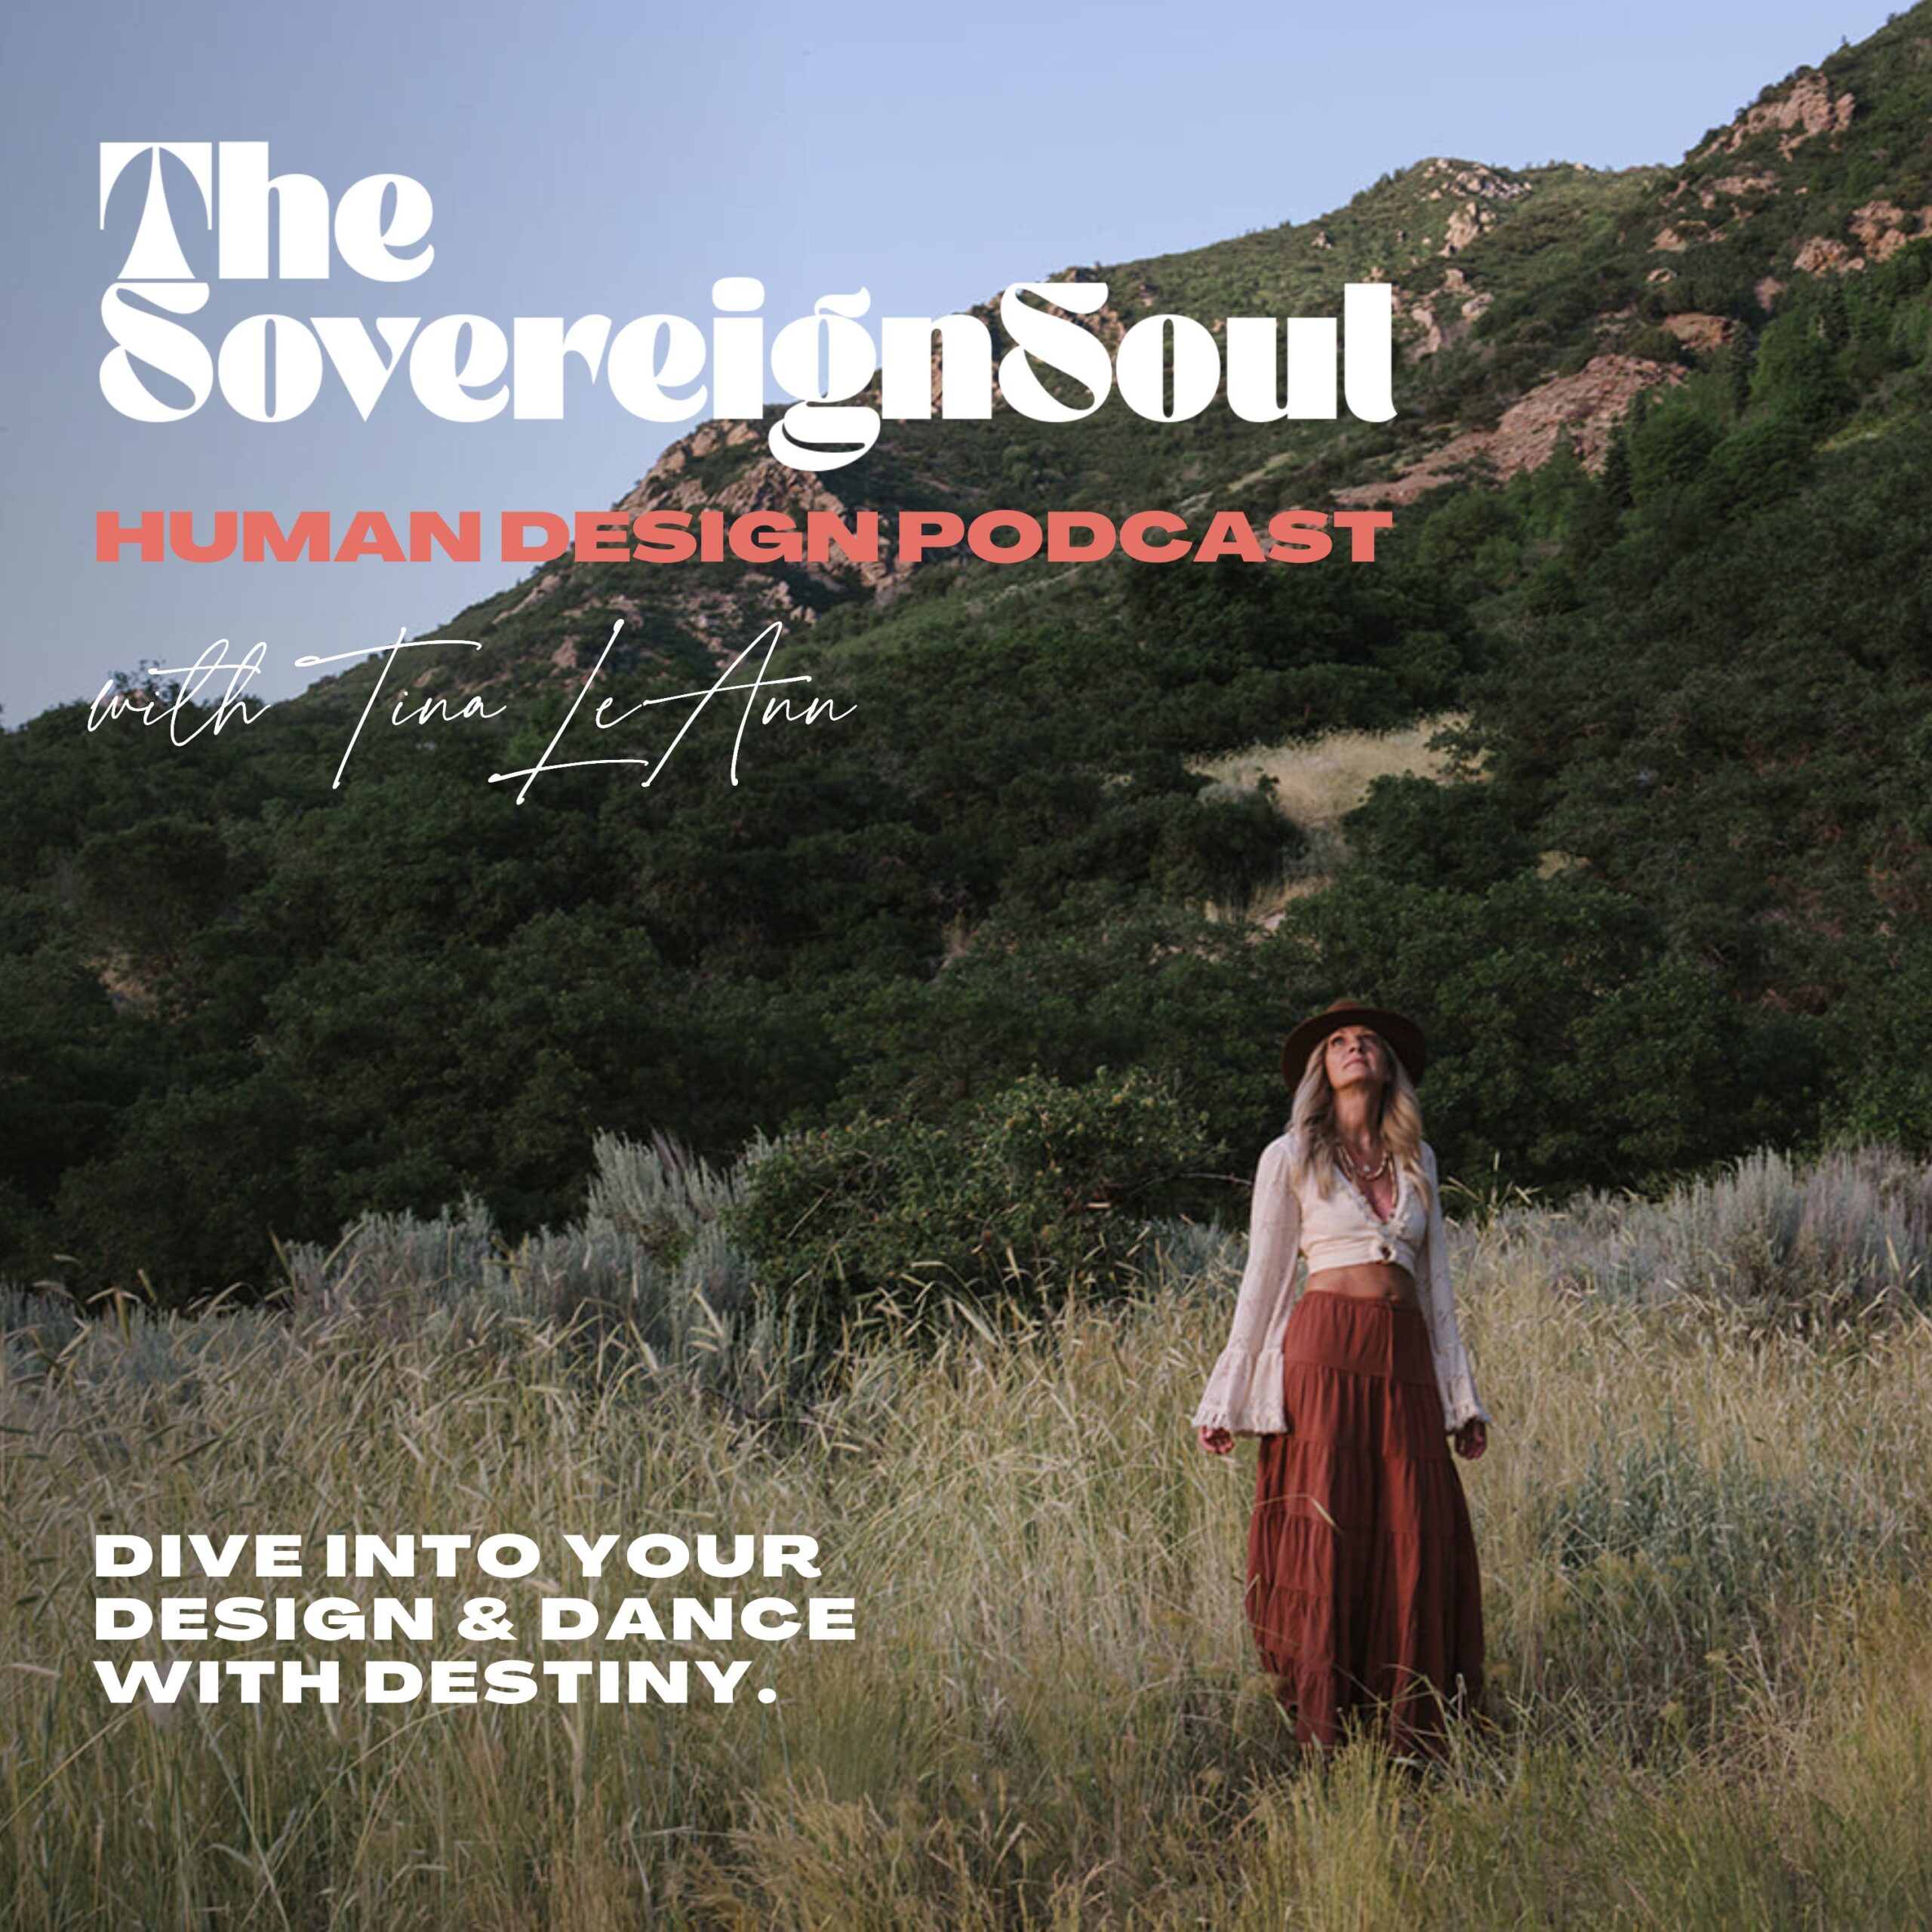 The Sovereign Soul Human Design Podcast